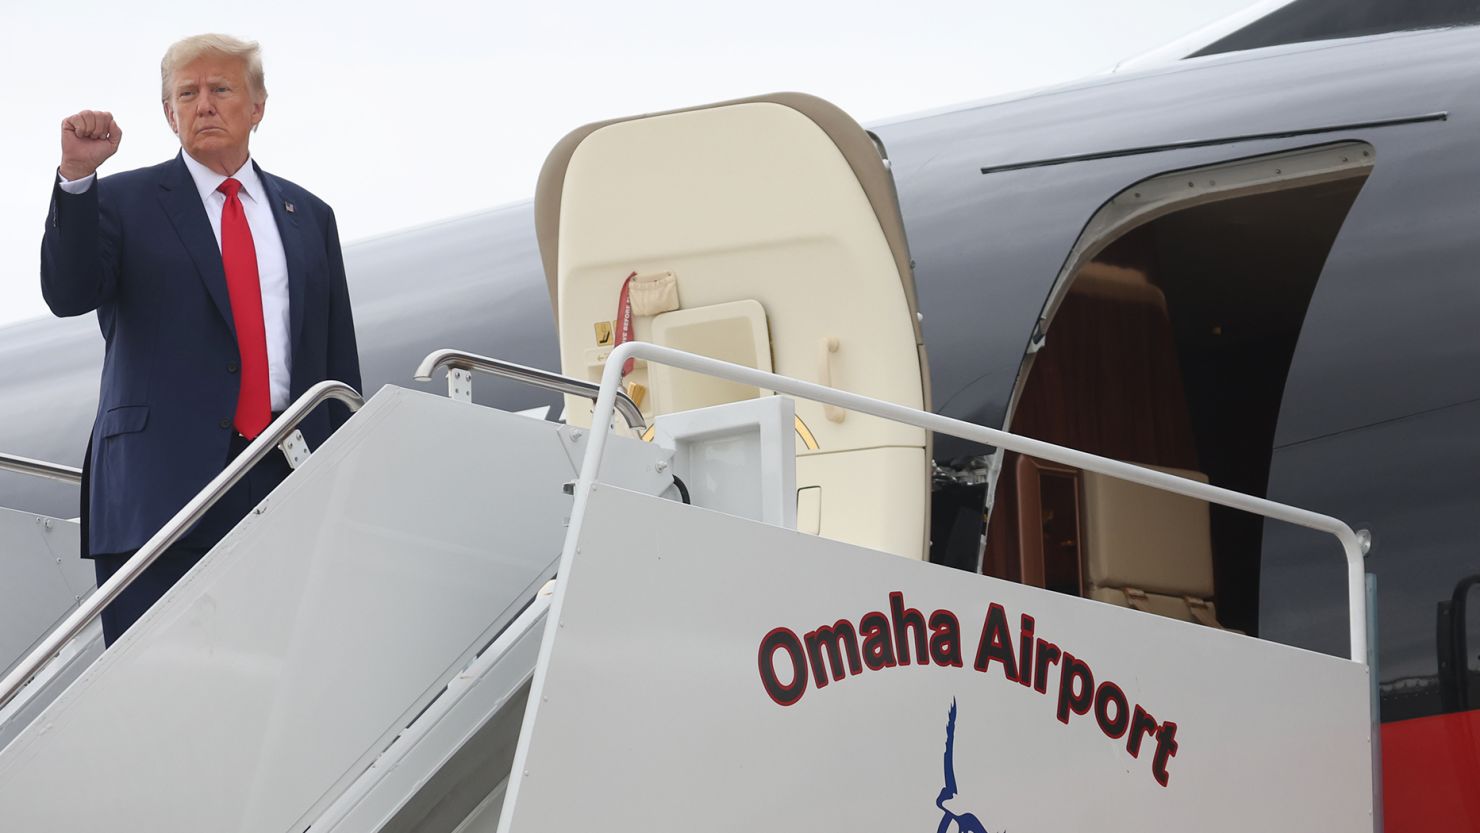 Former US President Donald Trump prepares to board his jet at the airport after holding a campaign event in Nearby Council Bluffs, Iowa on July 07, 2023 in Omaha, Nebraska.